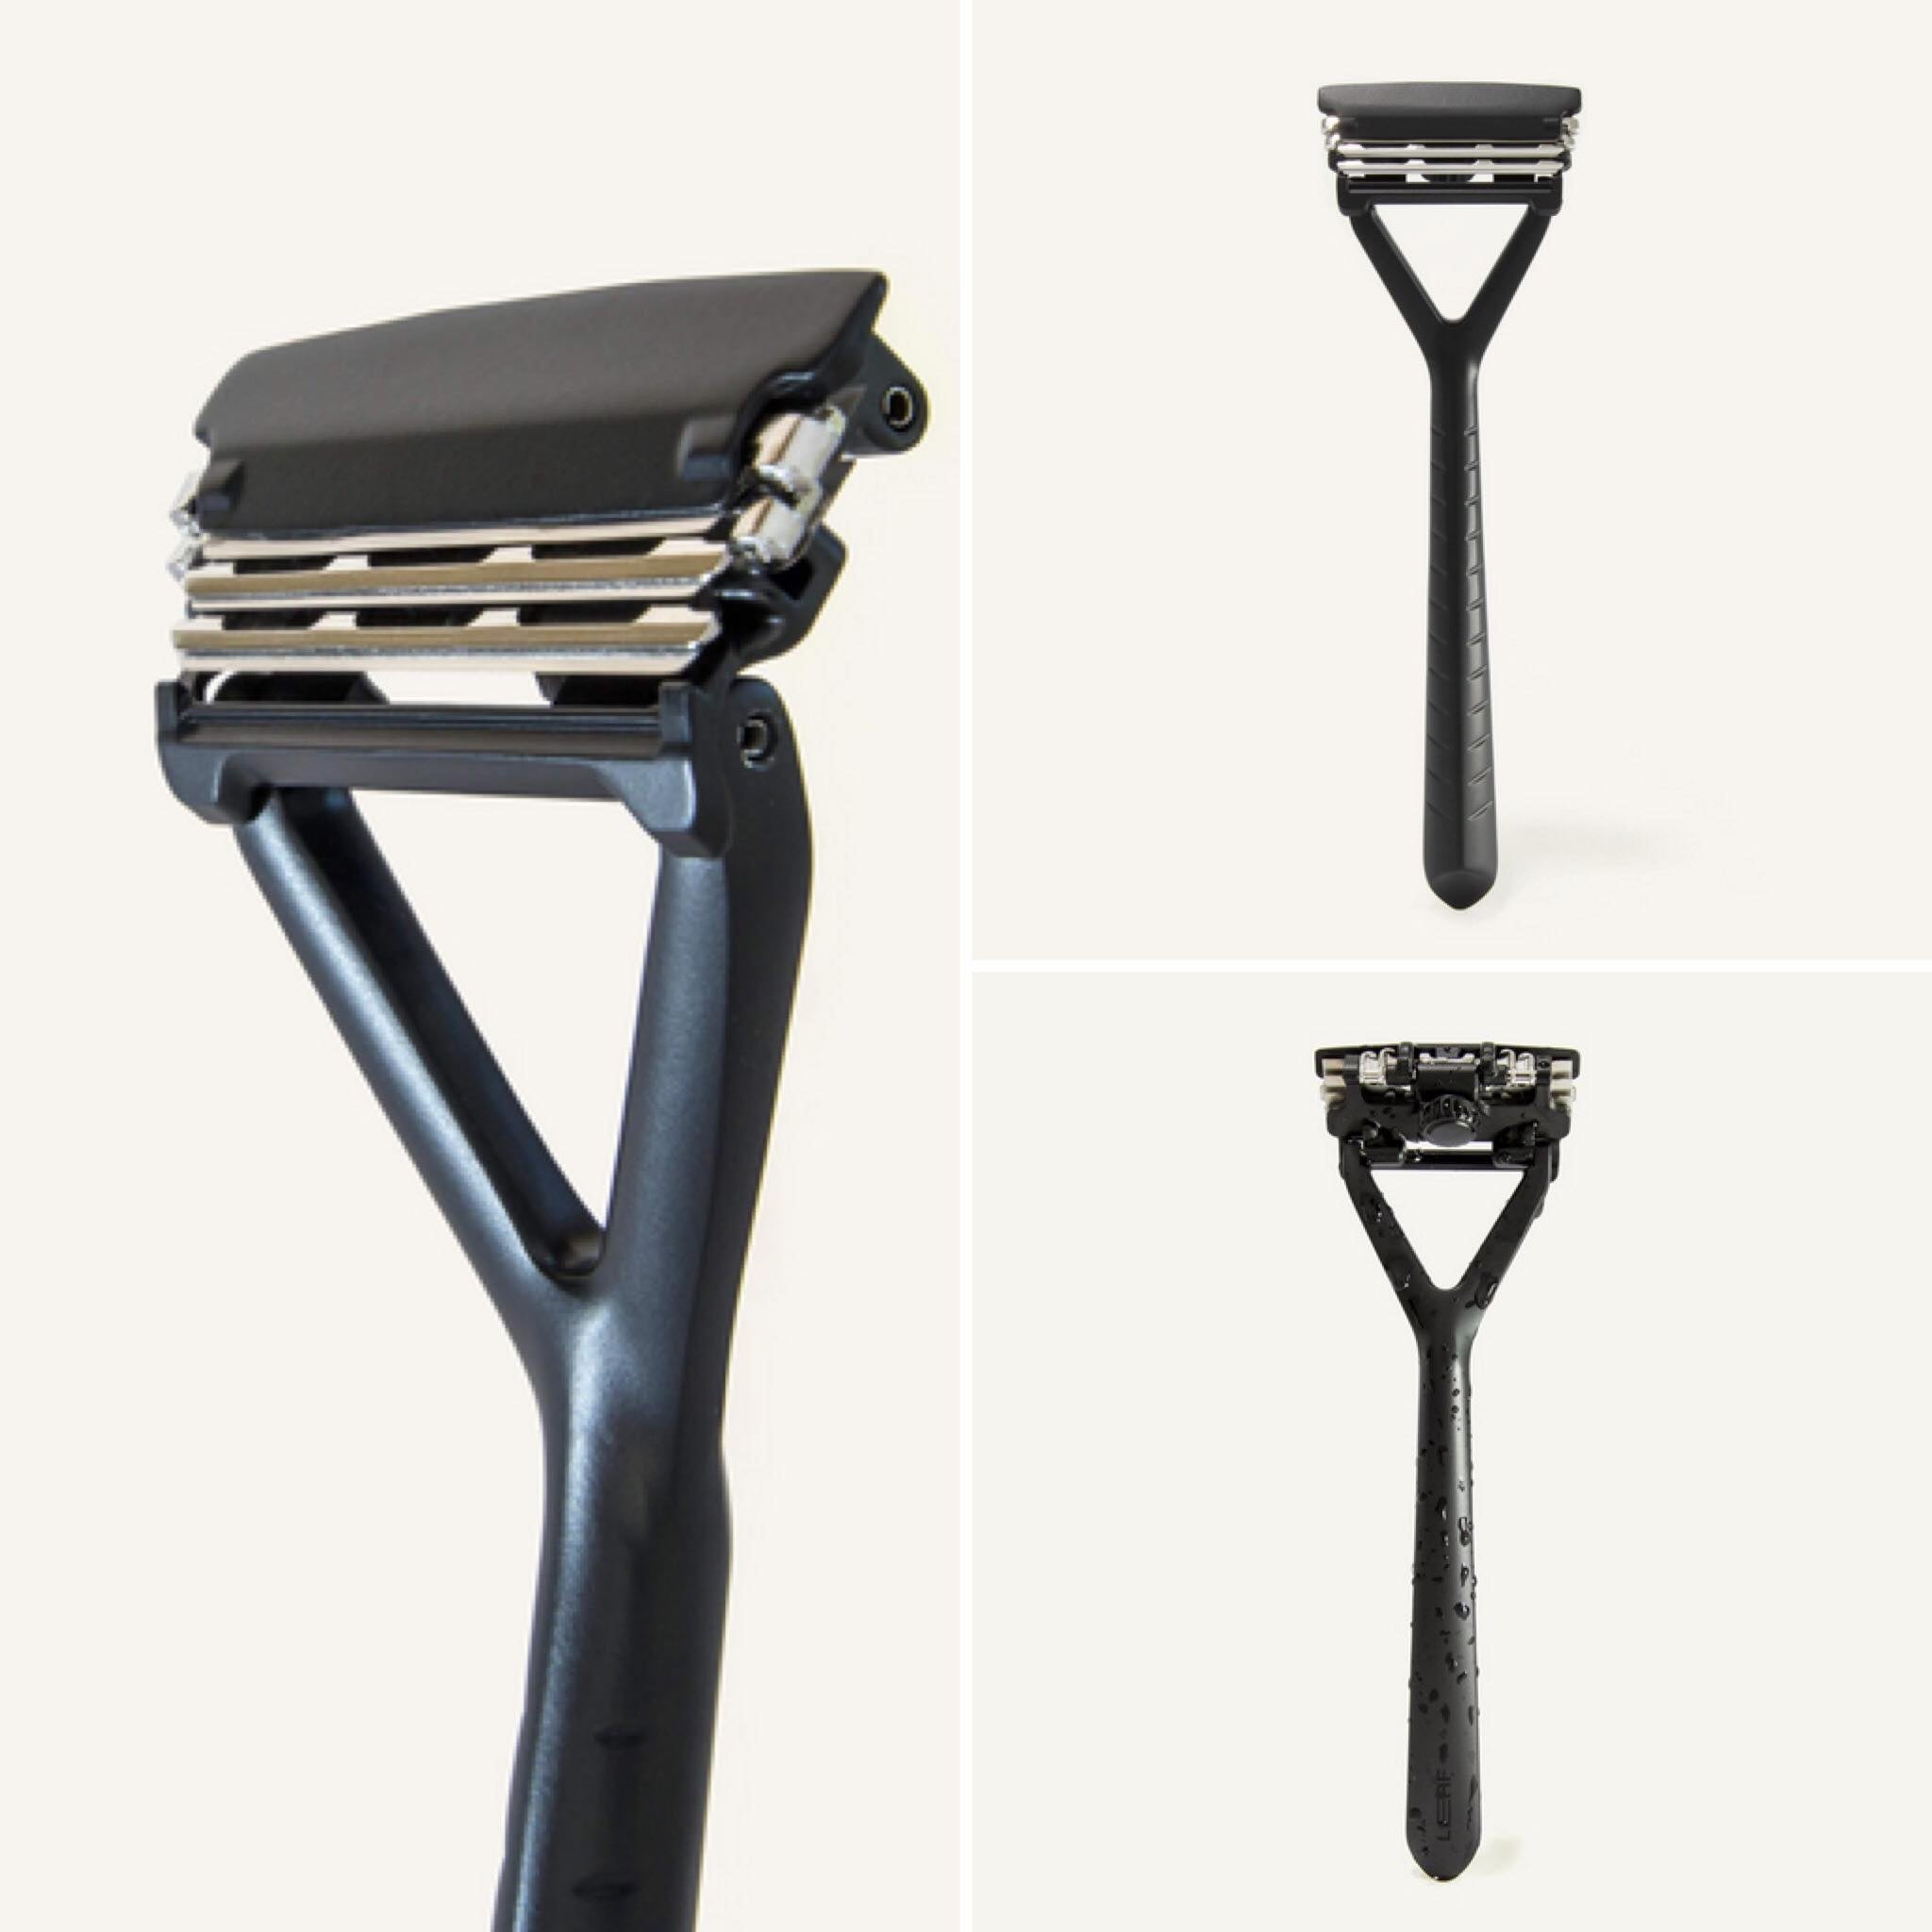 Leaf Razor with black finish is a modern razor by Leaf Shave with a built-in pivoting heads and up to three blades for a better, more sustainable shave every time